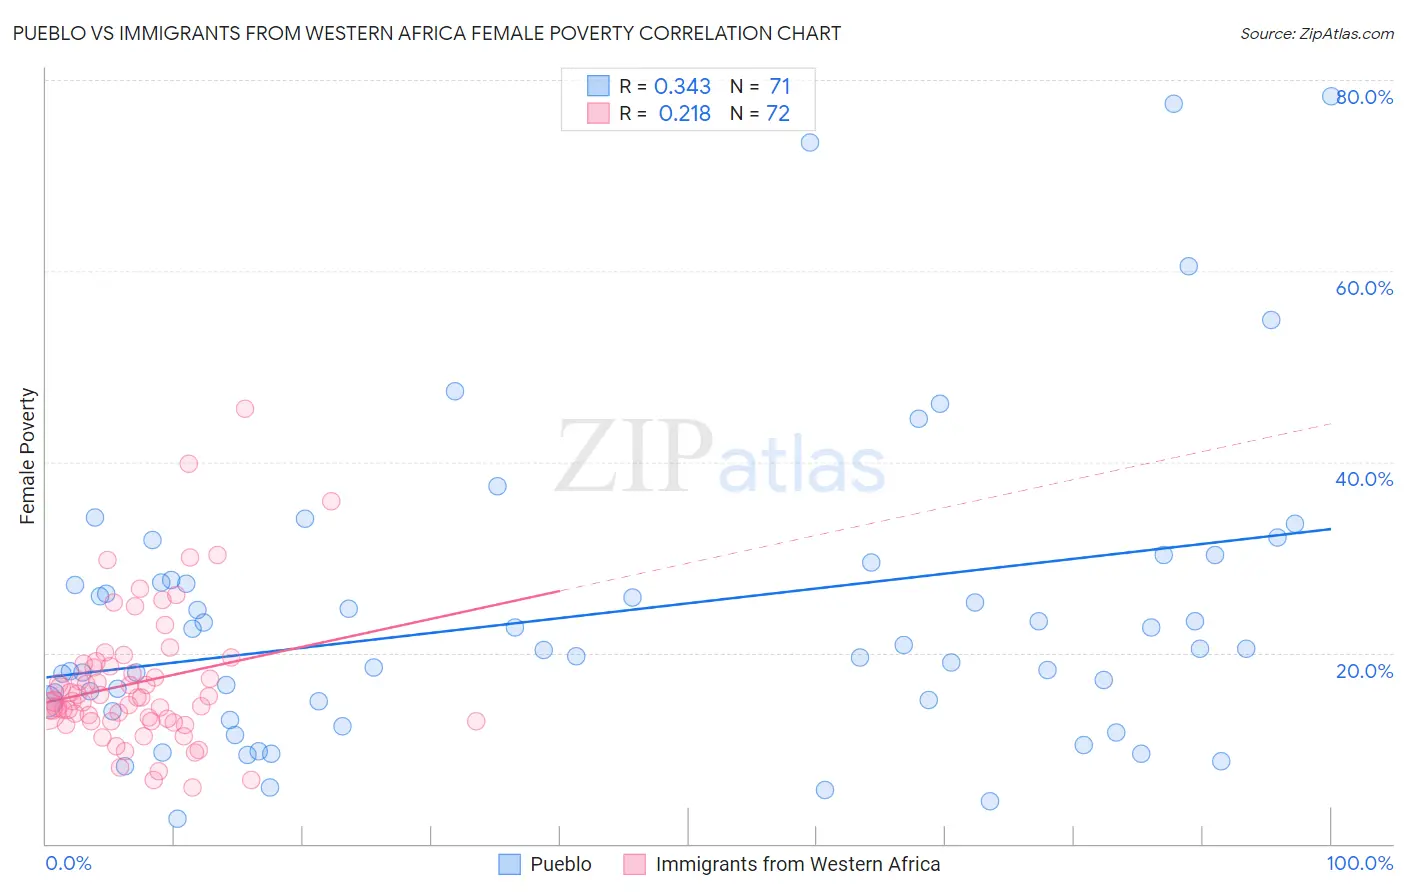 Pueblo vs Immigrants from Western Africa Female Poverty